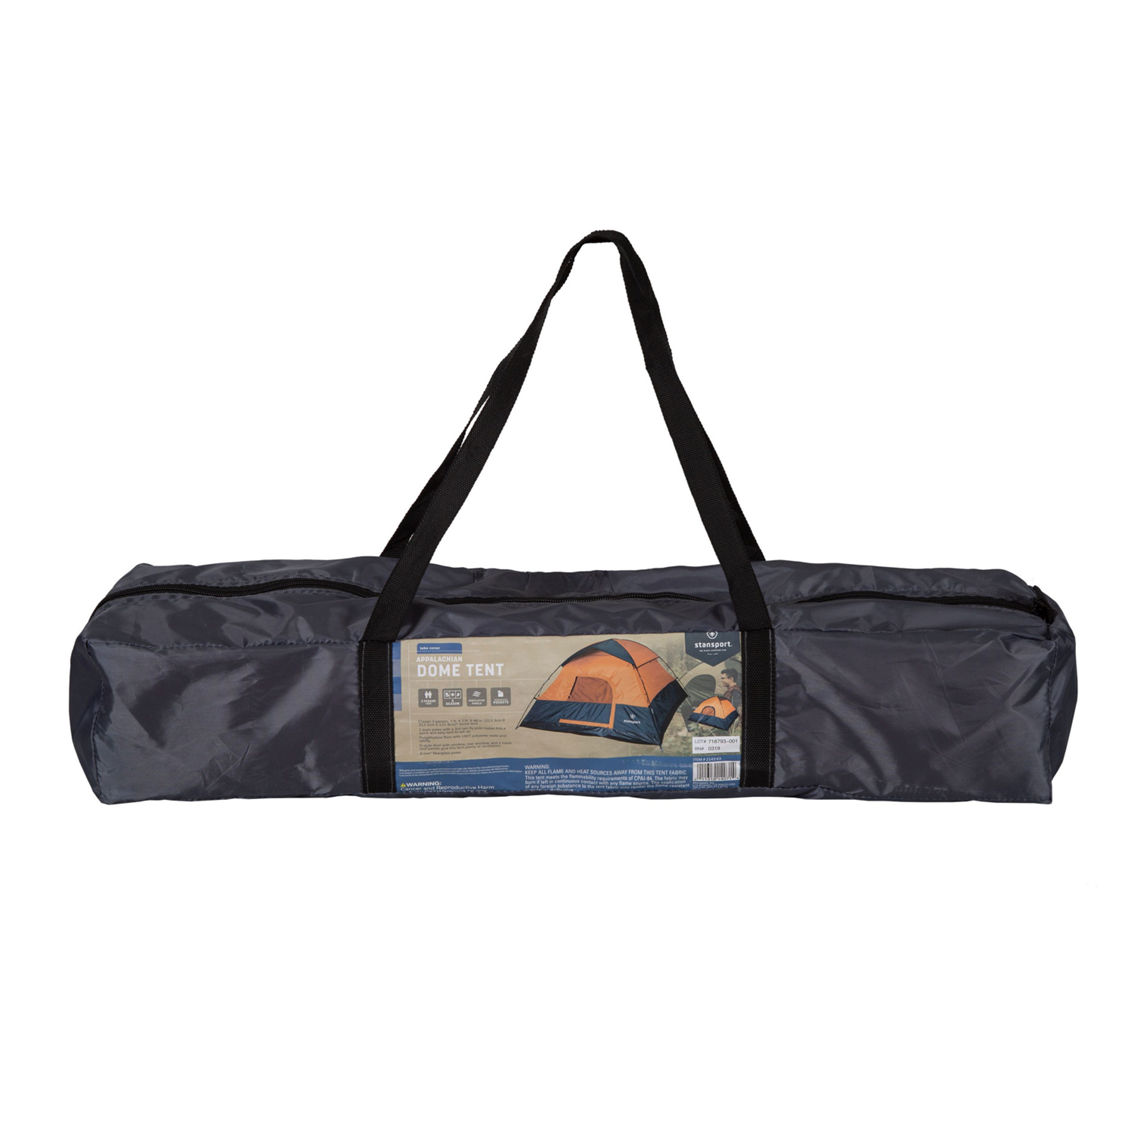 Stansport Appalachian Dome Tent - Image 4 of 5